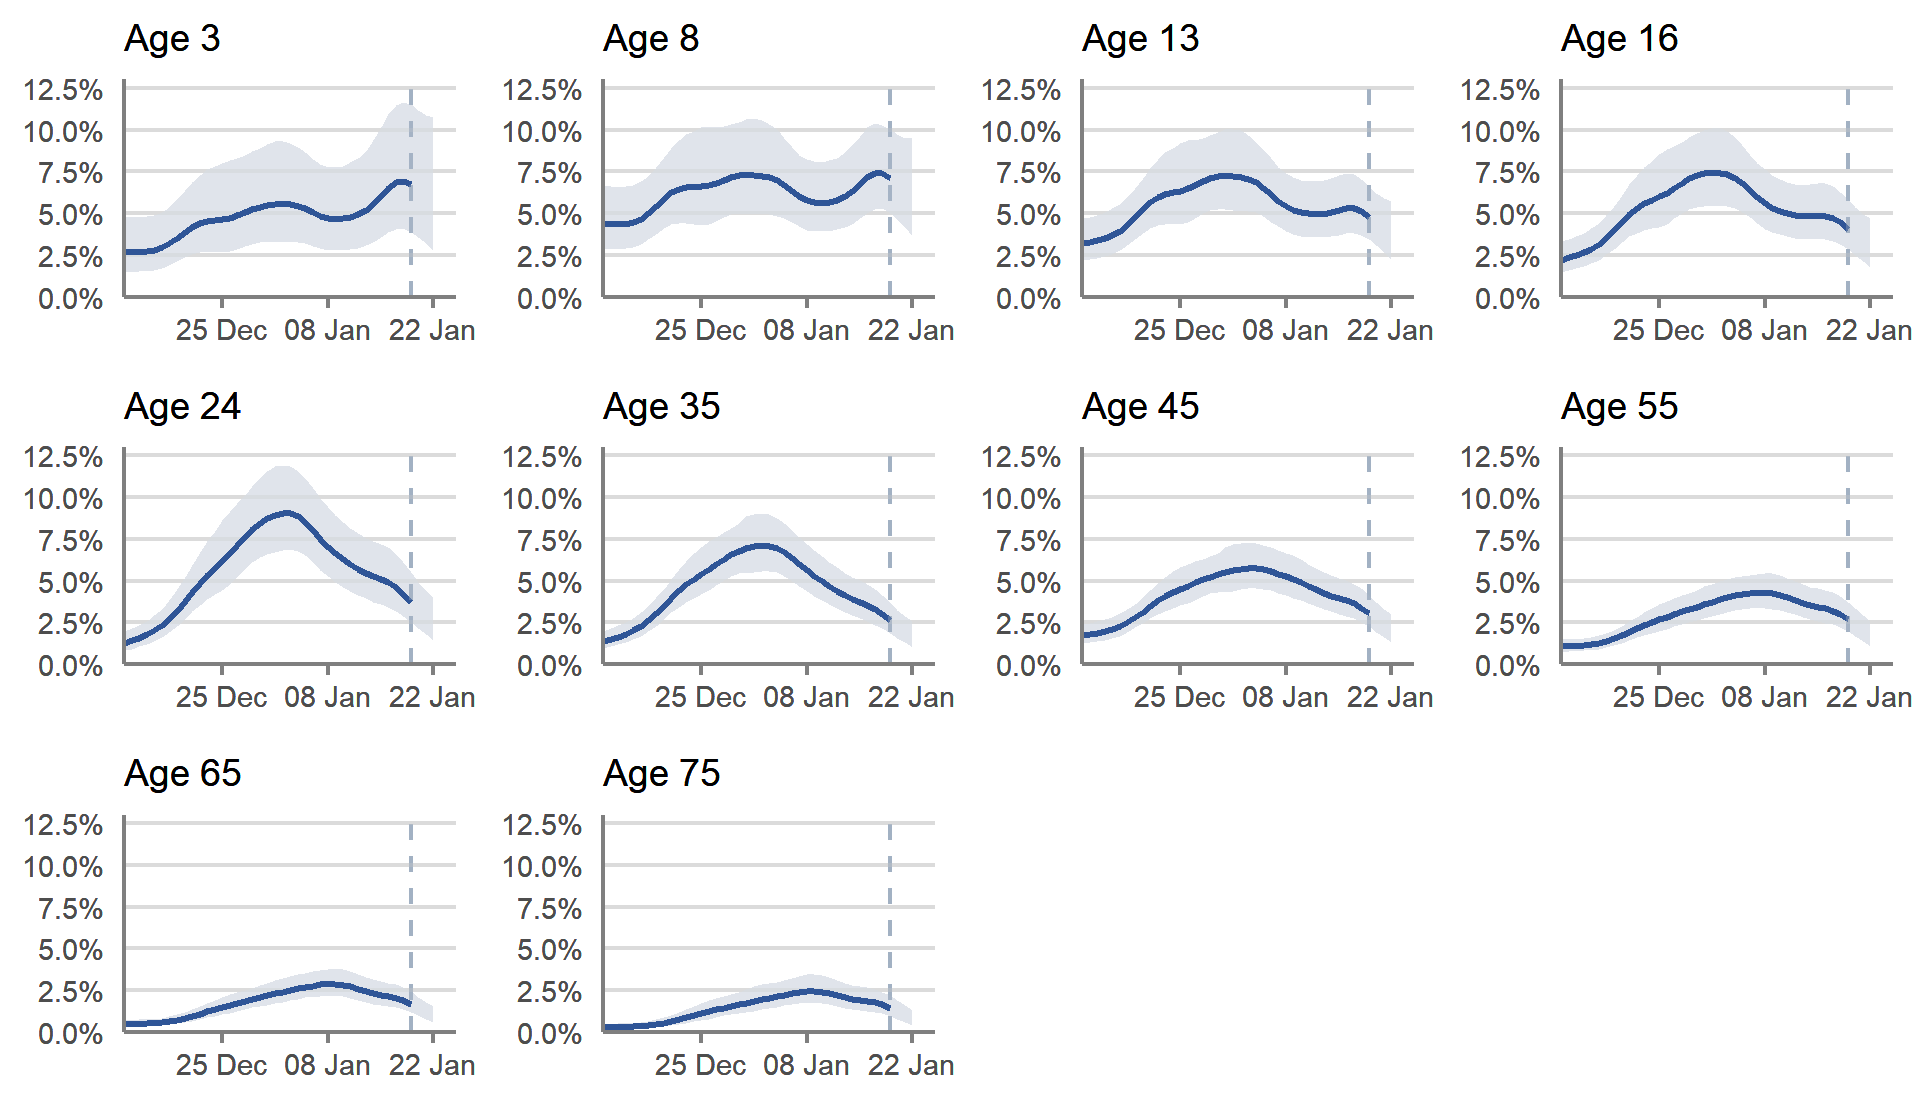 In Scotland, the trend in the percentage testing positive was uncertain for those of school age, and there was a decrease for young adults and older ages.